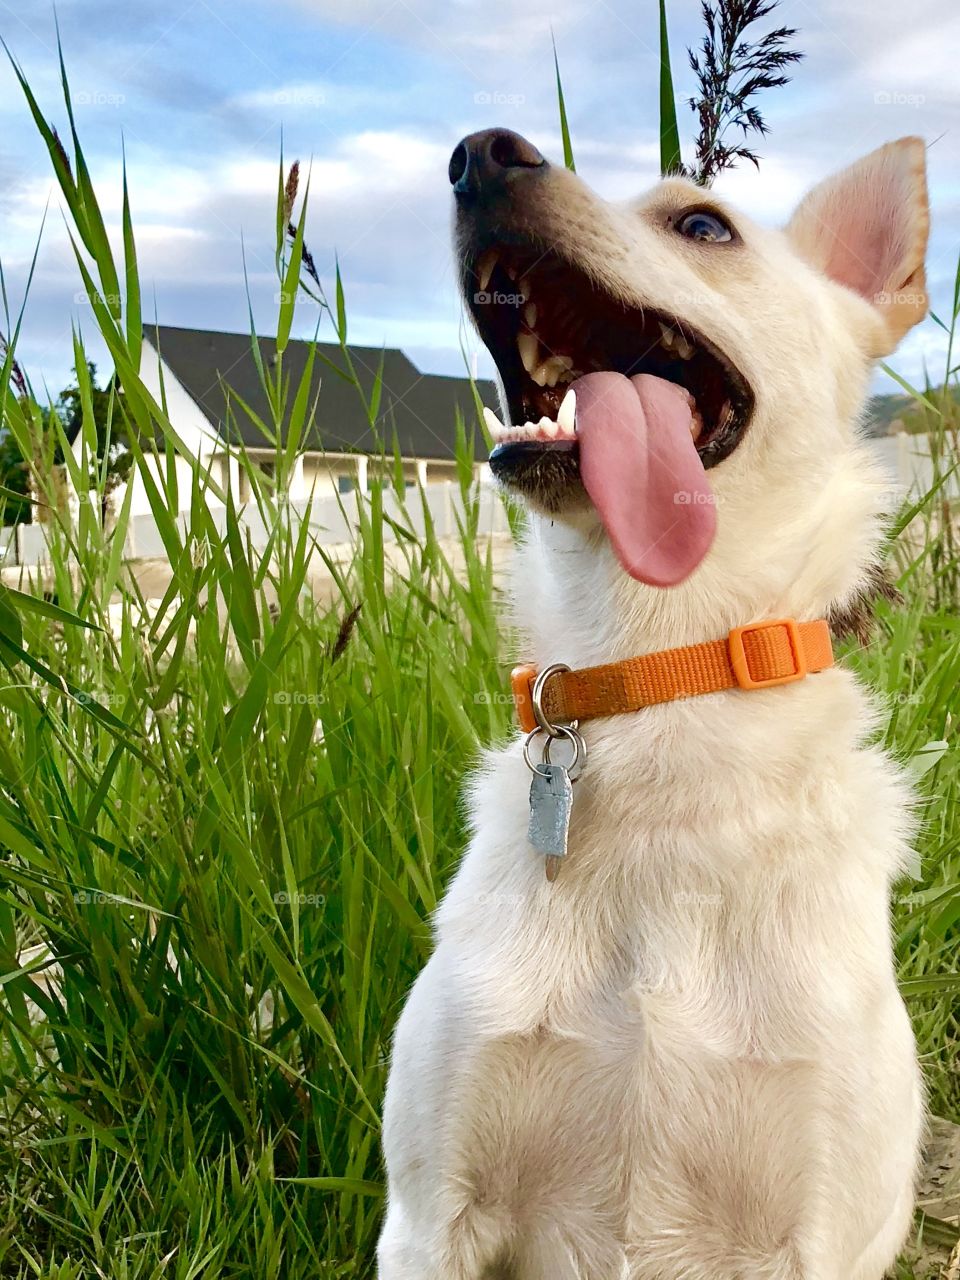 A Siberian Husky/Pomeranian pup enjoying an evening at the local dog park with his dads. So many dogs! So much excitement! And what a good boy to pose for a picture!